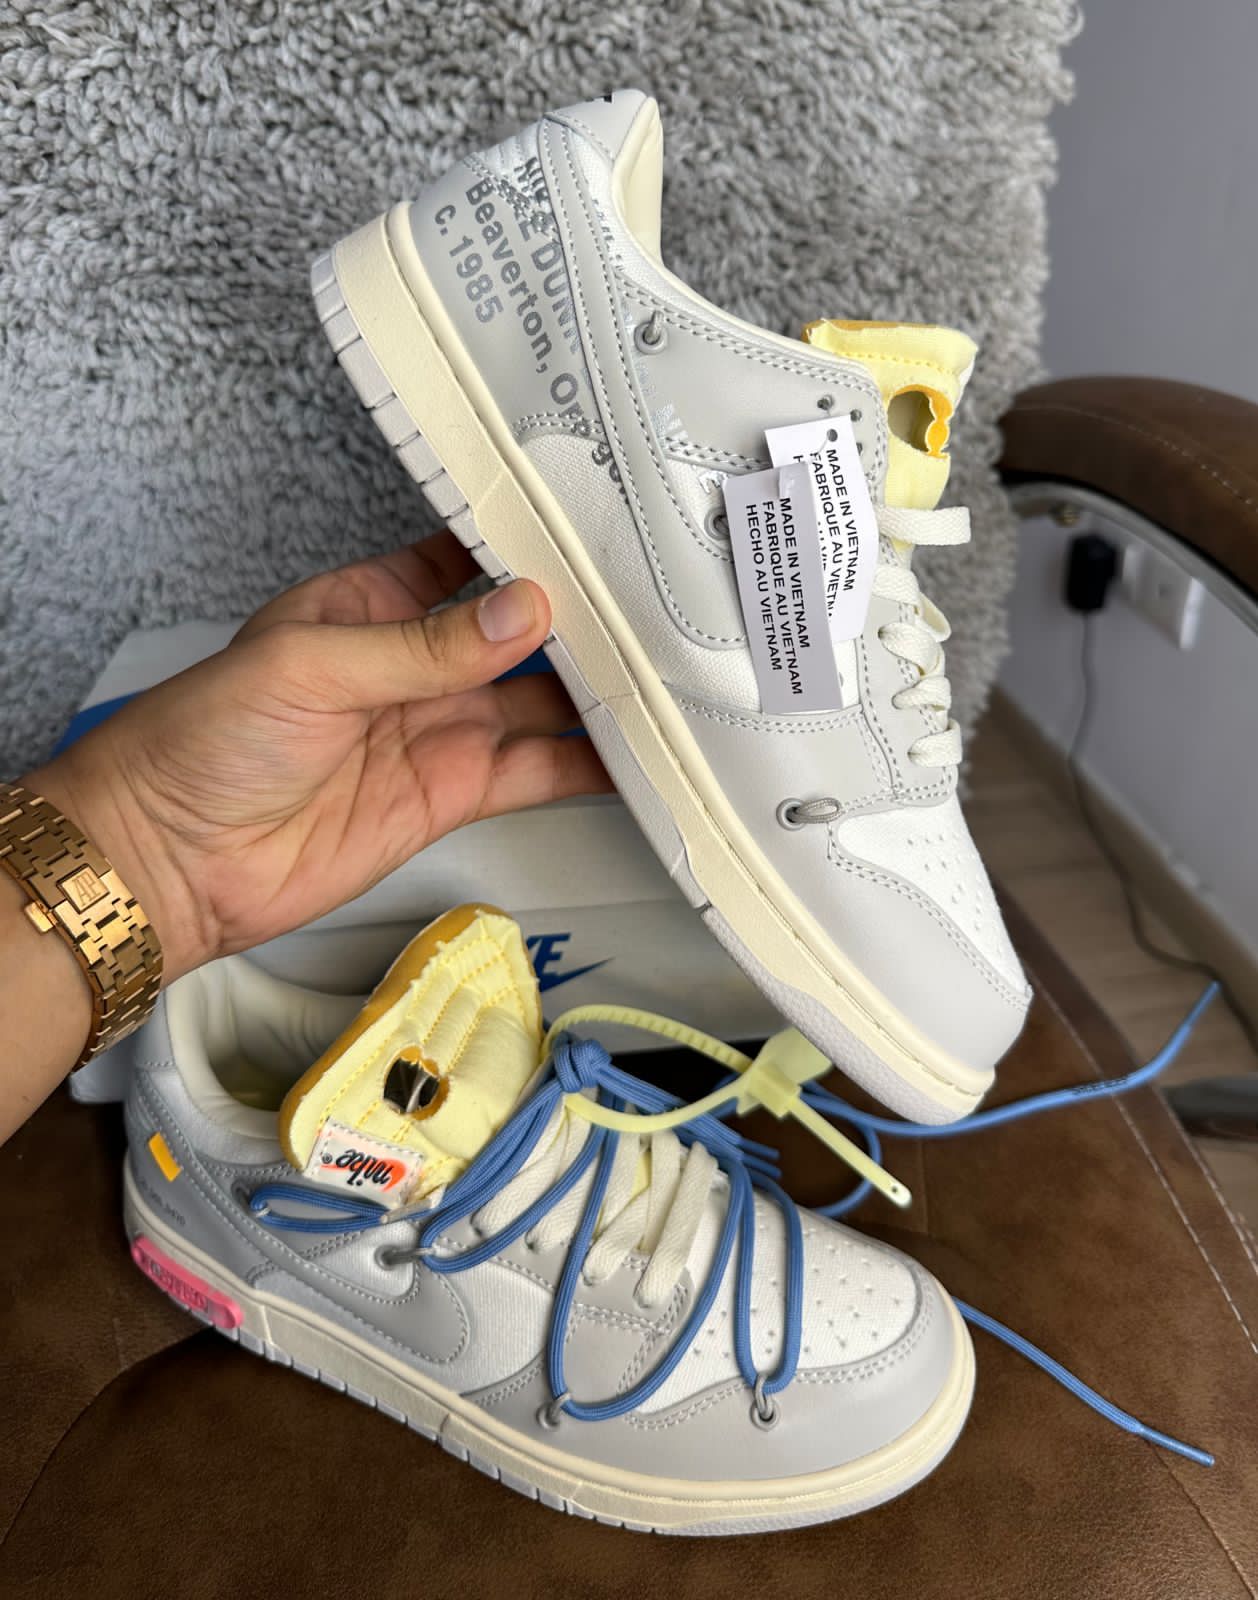 SB Dunk Off White Sneakers